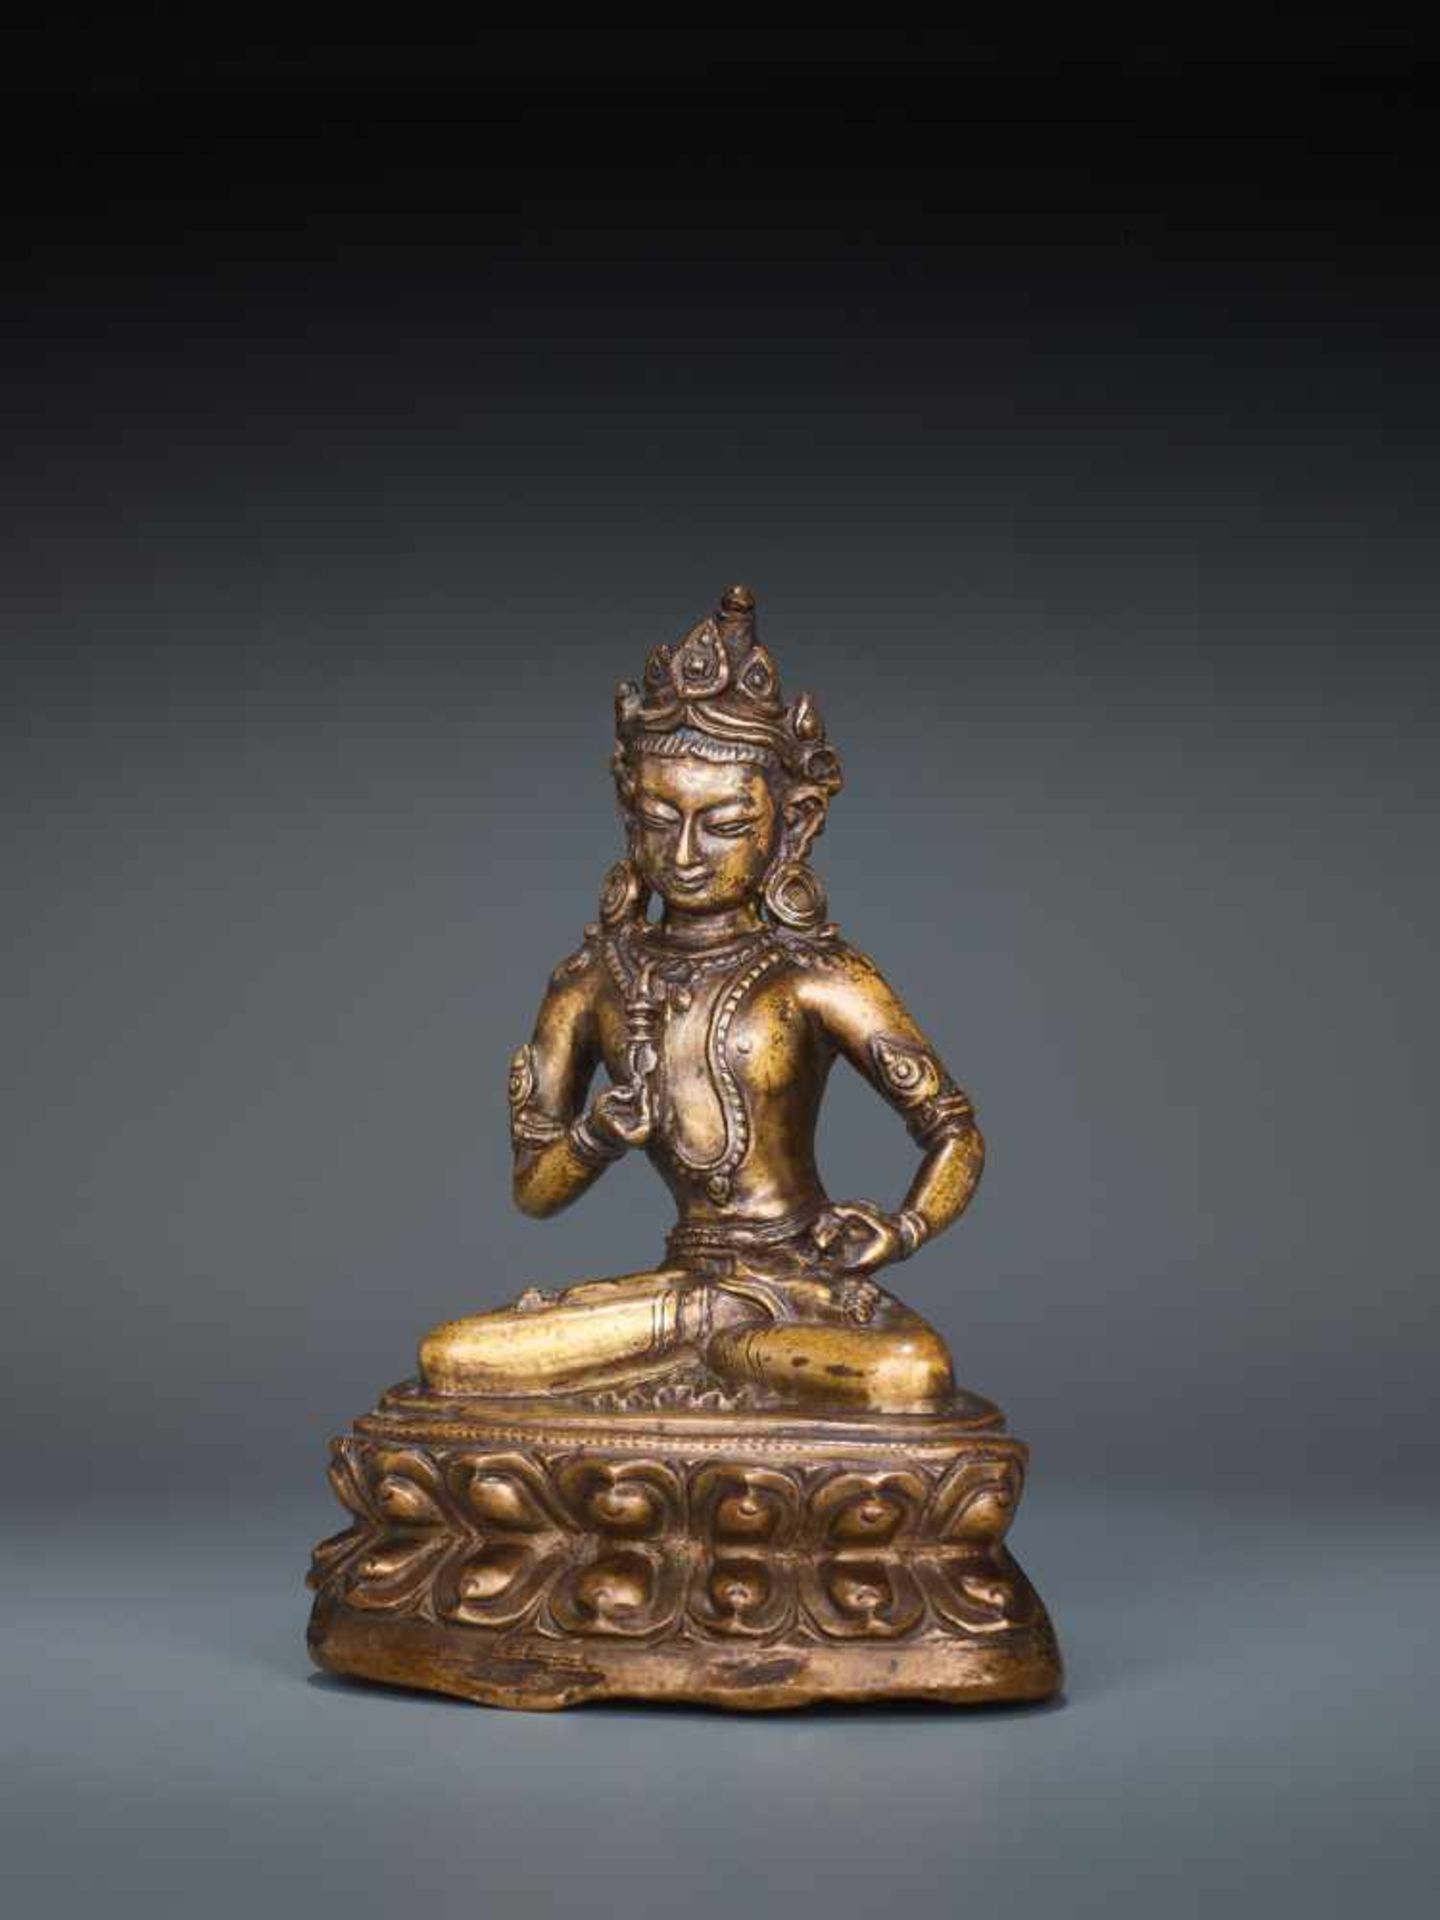 A FINE BRONZE FIGURE OF VAJRASATTVA, TIBET, 16th - 17th CENTURYCast and chased bronze Tibet, - Image 2 of 6